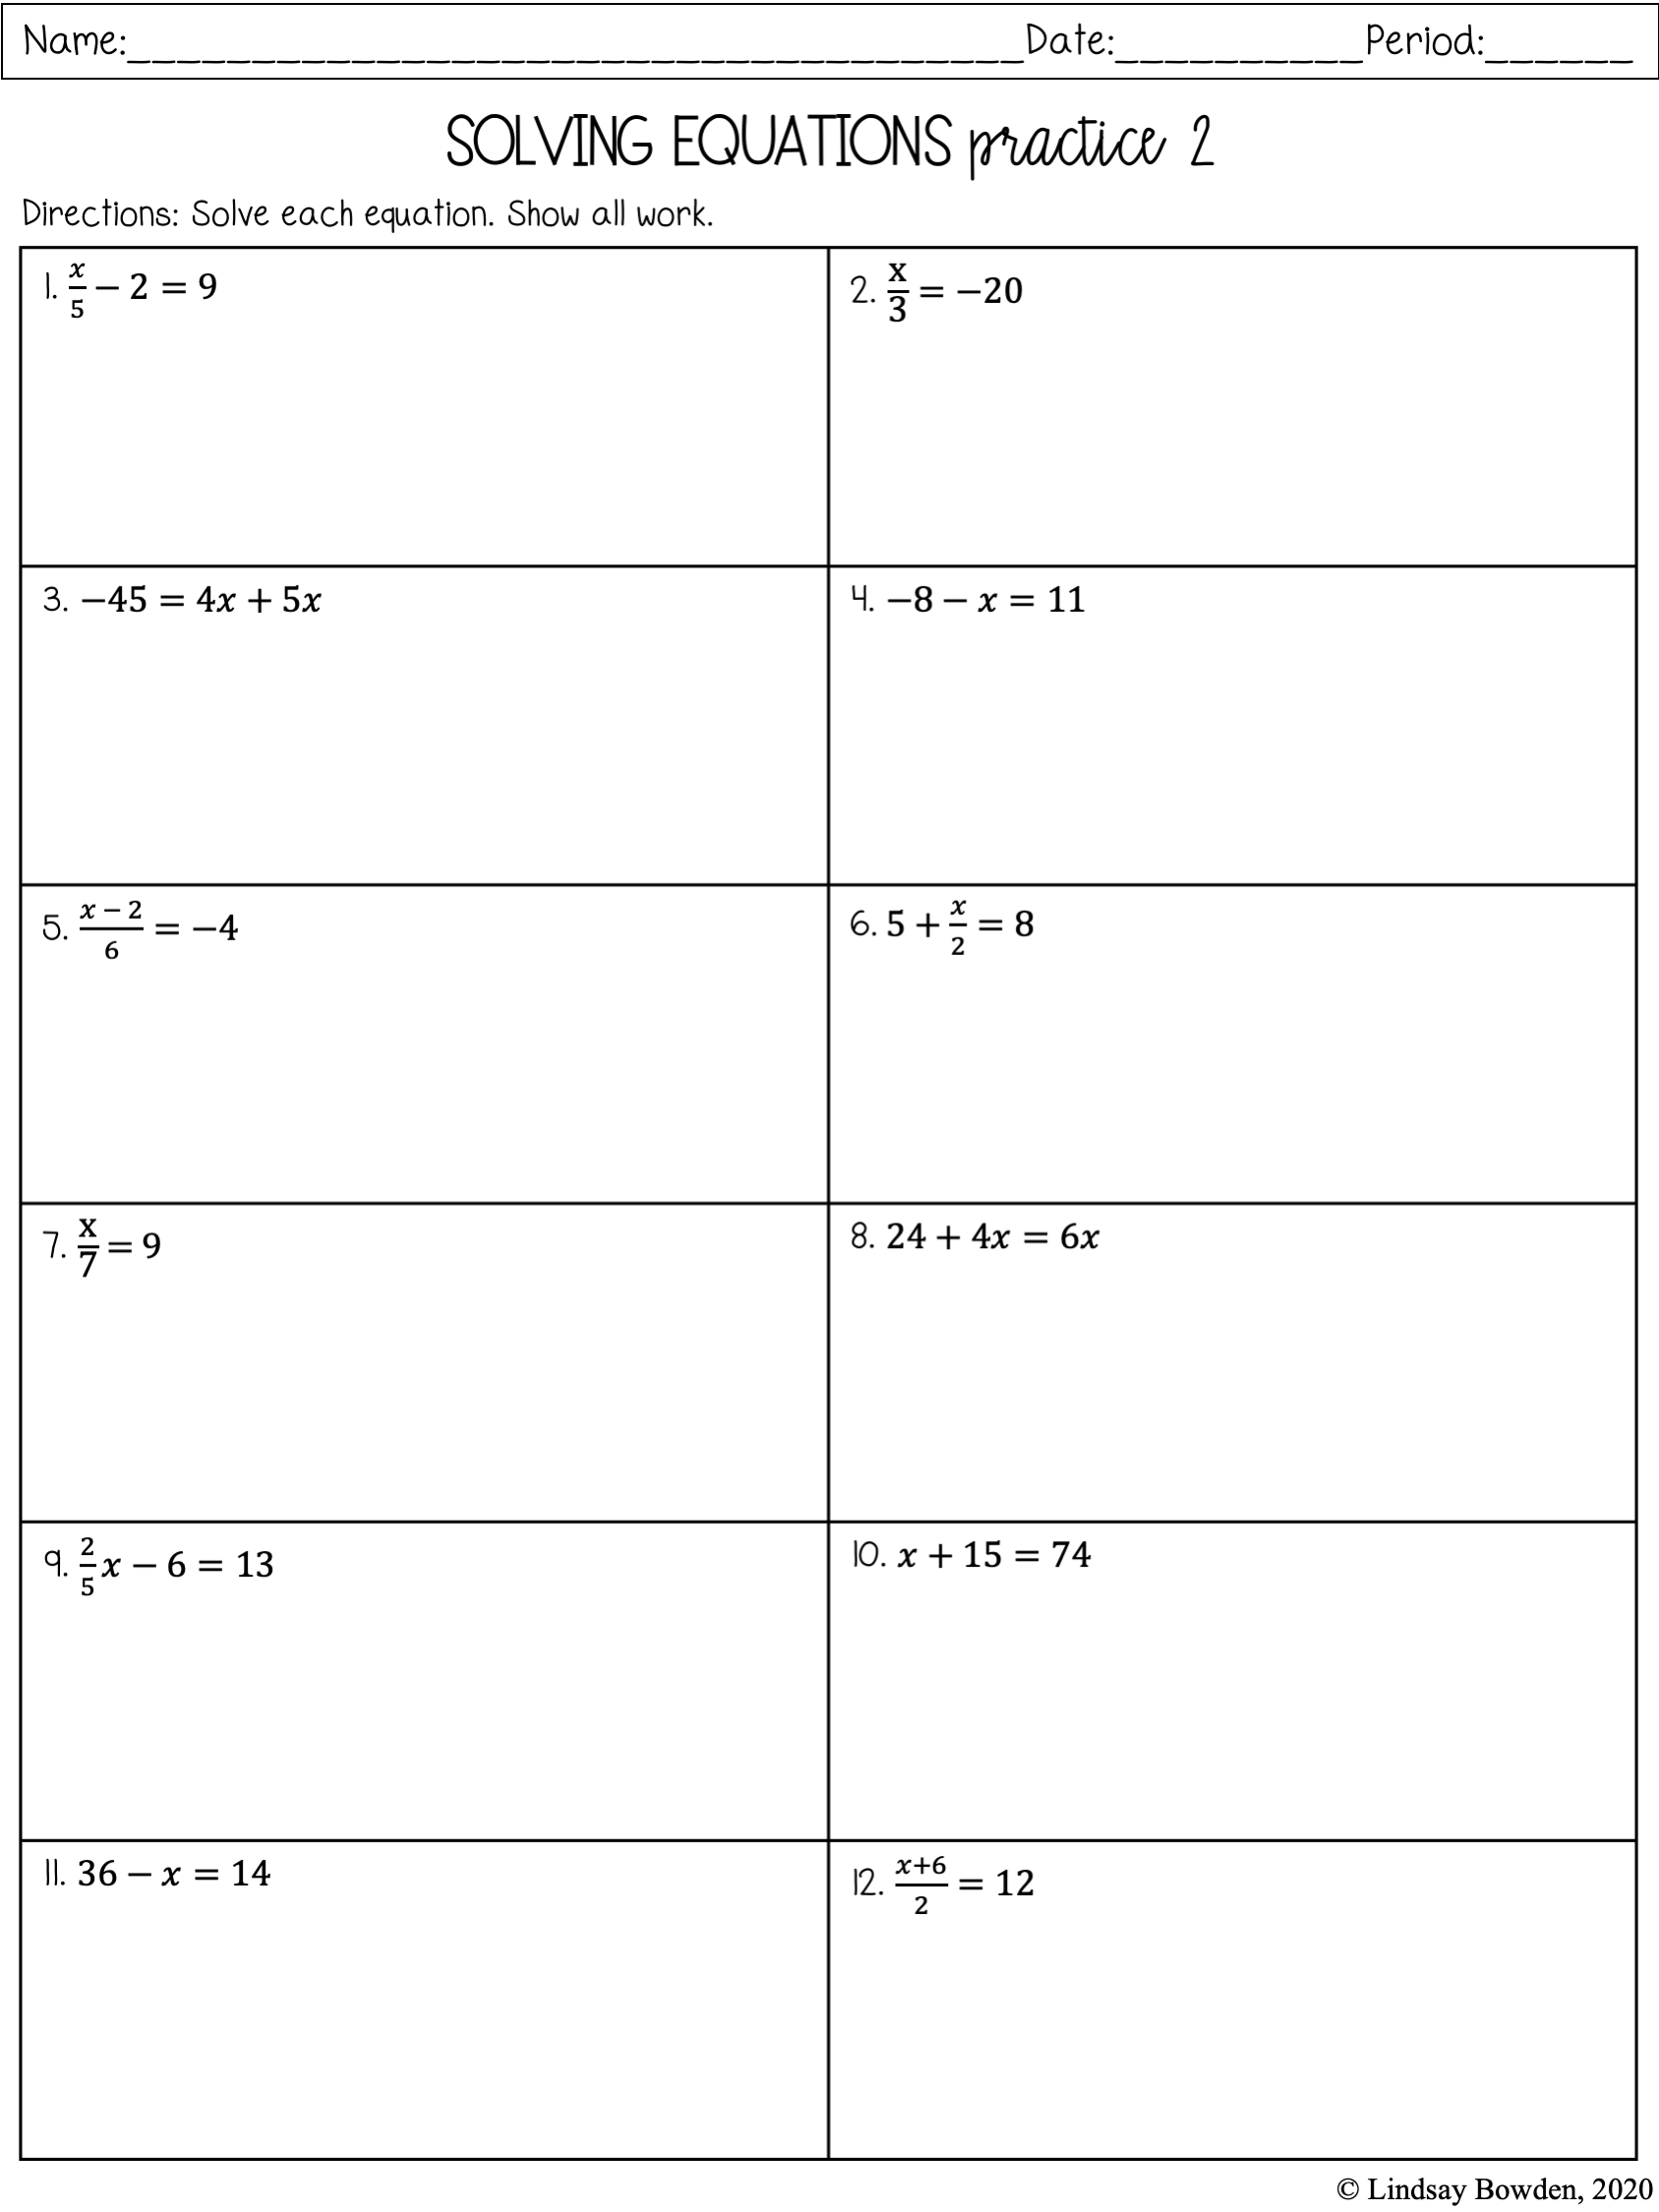 Solving One and Two-Step Equations - Lindsay Bowden Regarding 2 Step Equations Worksheet